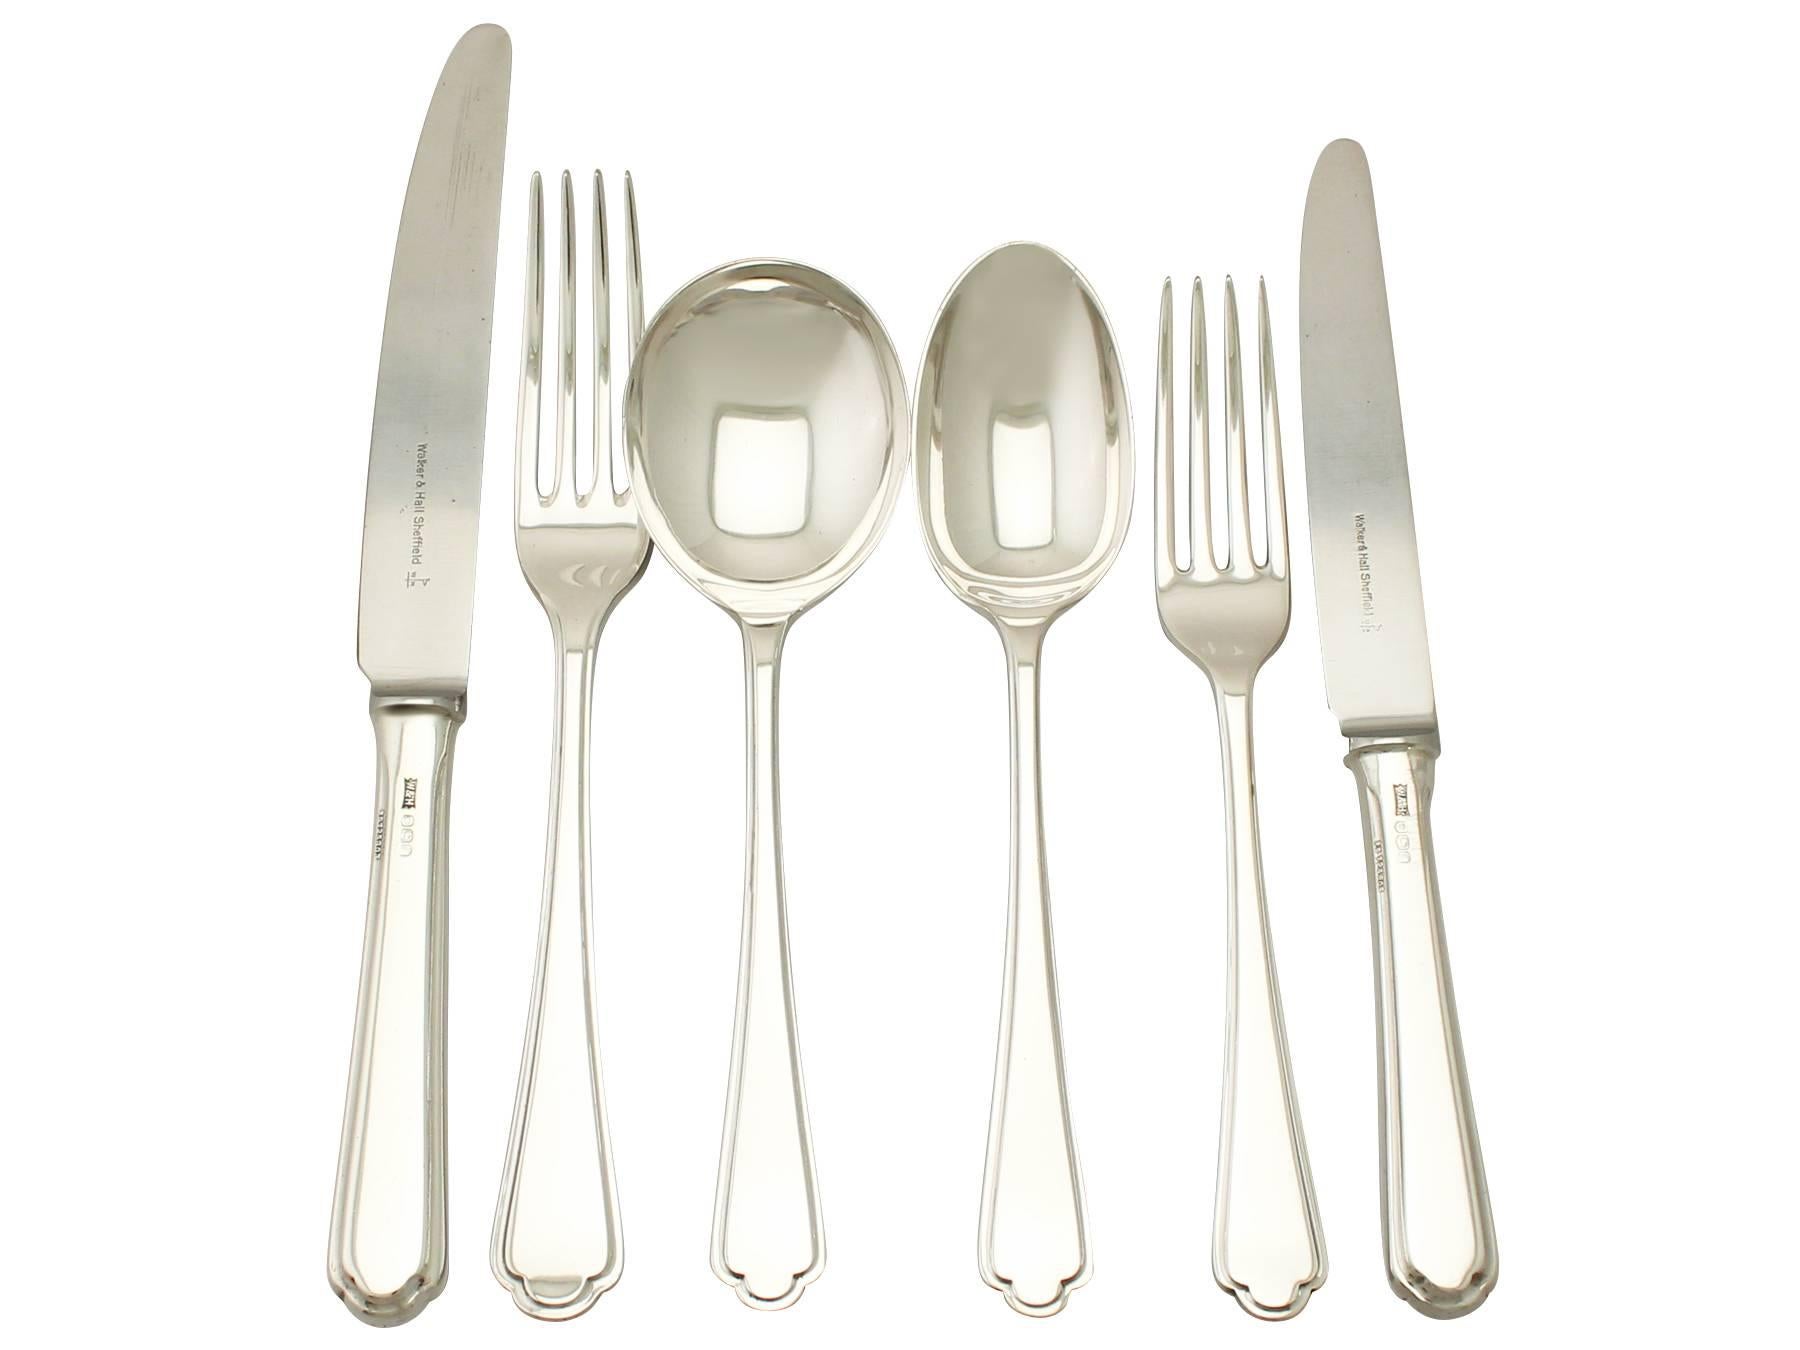 An exceptional, fine and impressive vintage Elizabeth II English straight sterling silver Dog Nose pattern flatware service for eight persons, an addition to our silver cutlery collection.

The pieces of this exceptional vintage Elizabeth II